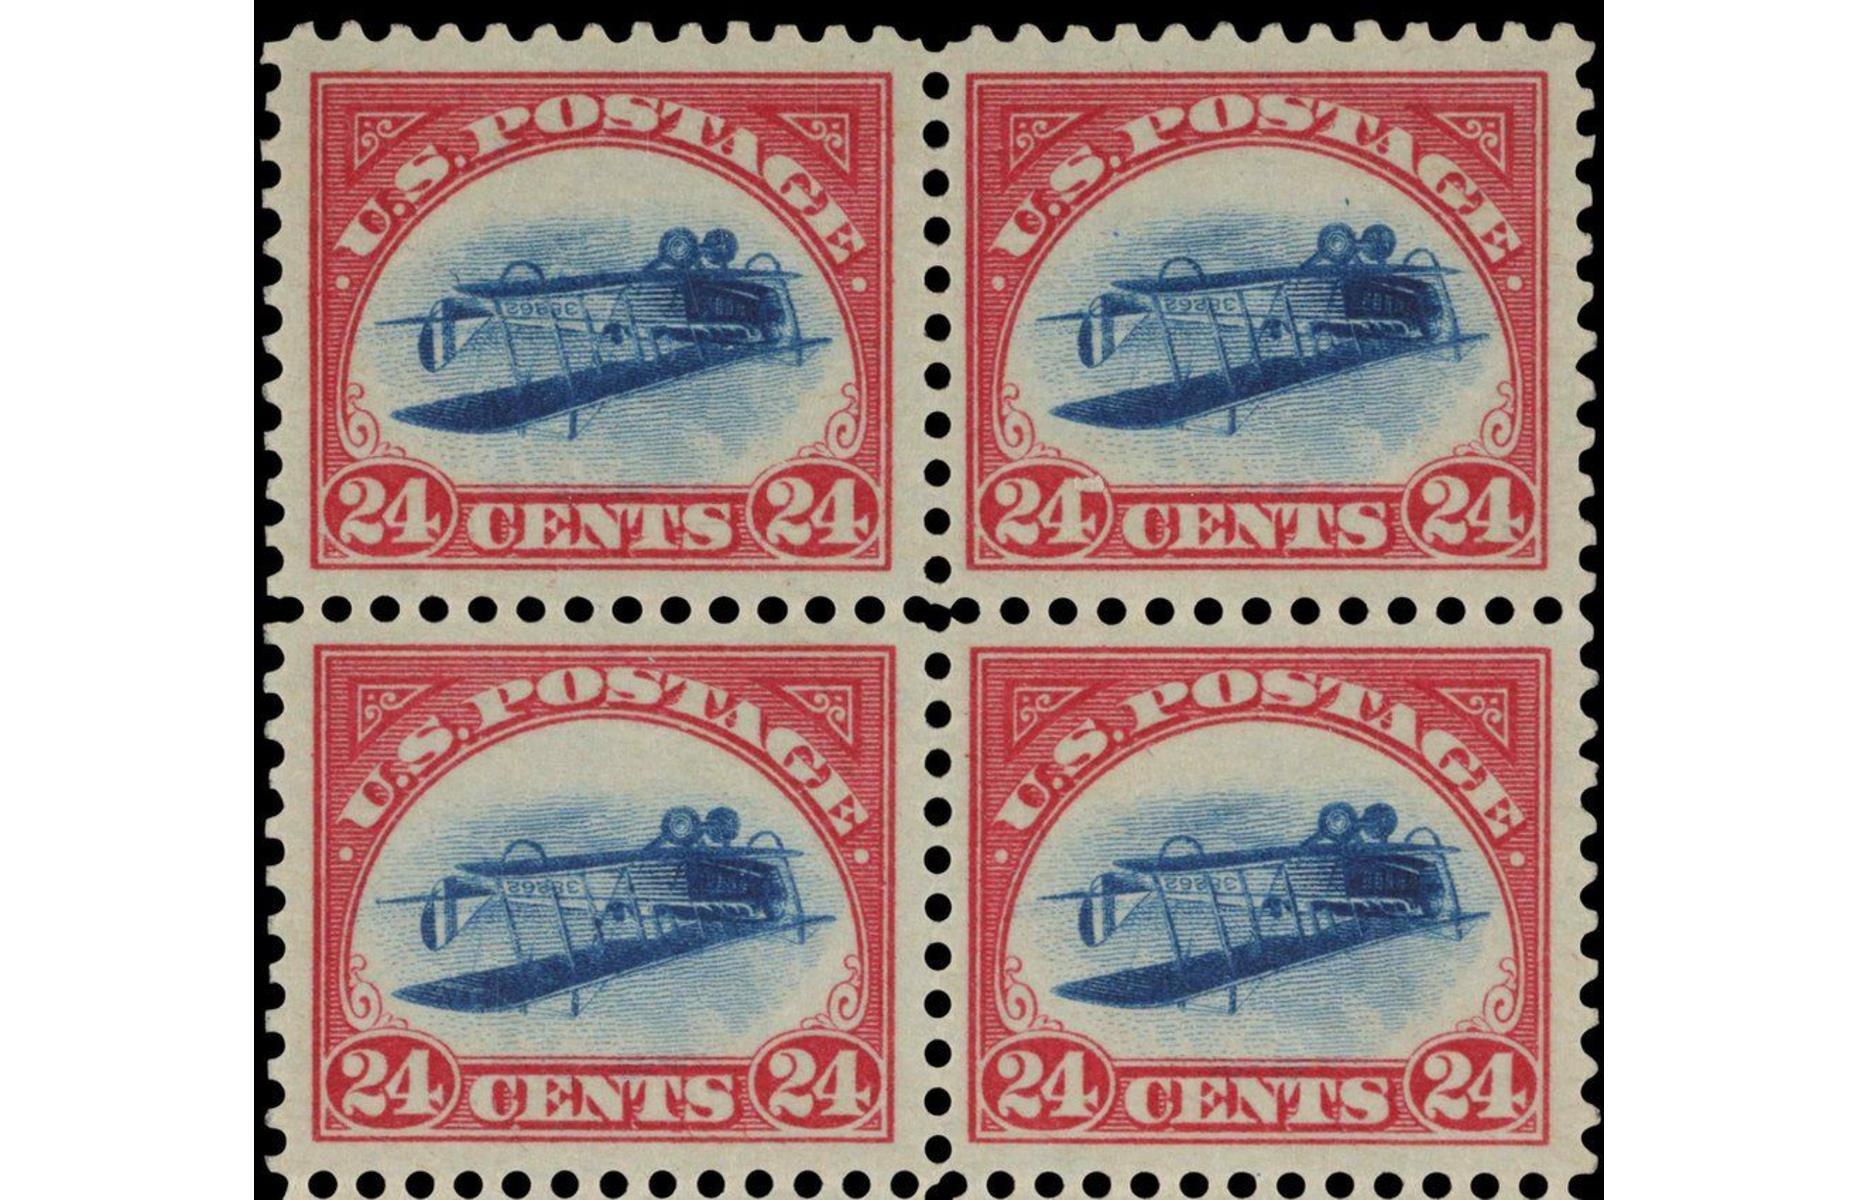 1918 US Inverted 24¢ Jenny Plate Block of stamps – $4.9 million (£3.7m)